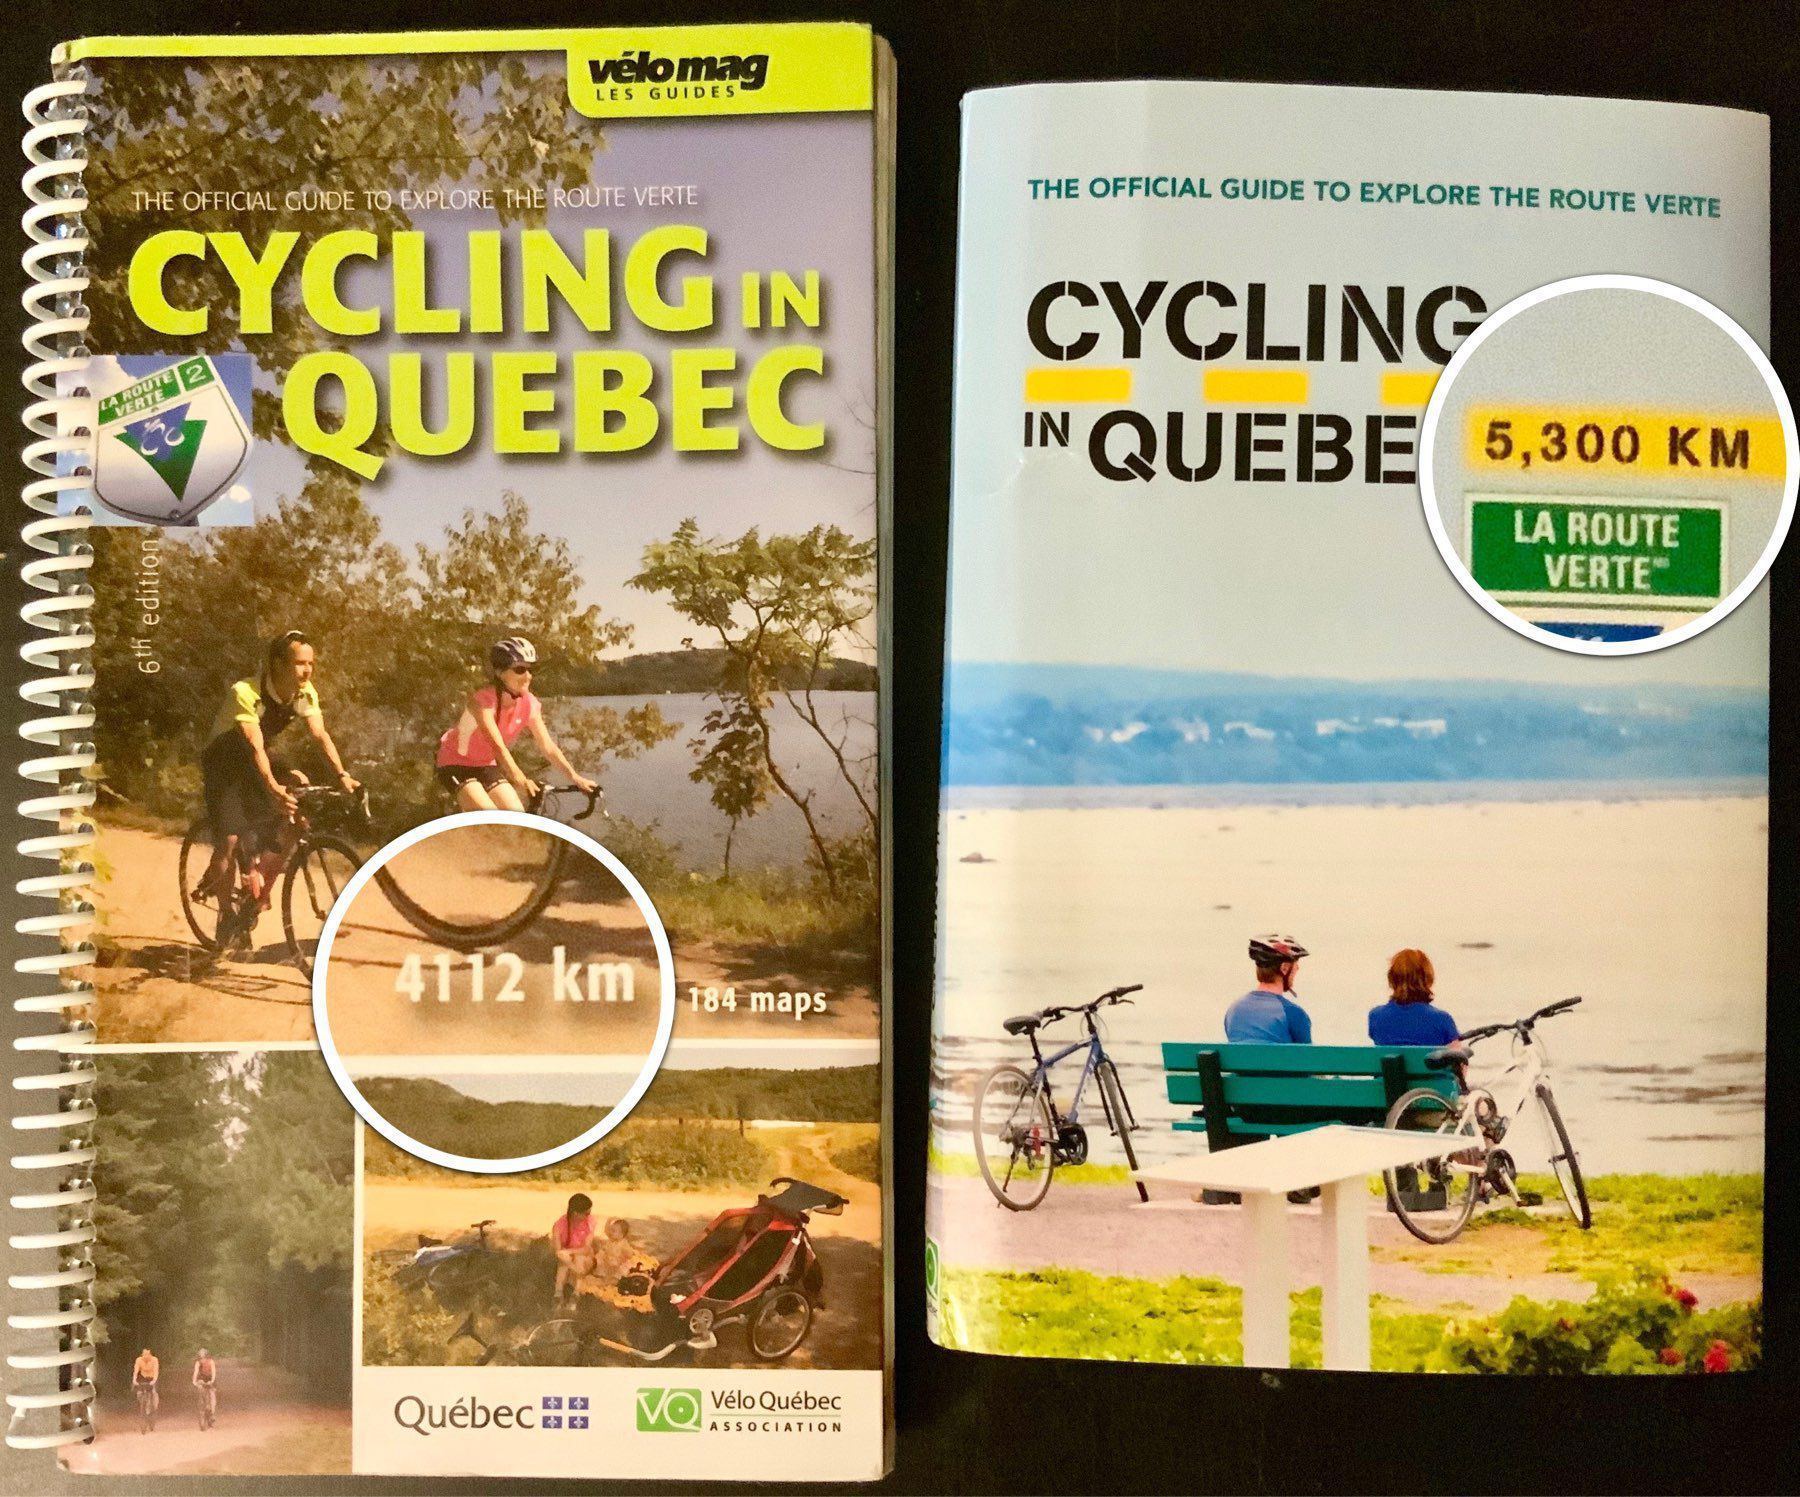 Two editions of Cycling in Quebec books, the official guide to explore the Route Verte, showing how many kilometres of bikeways they cover.